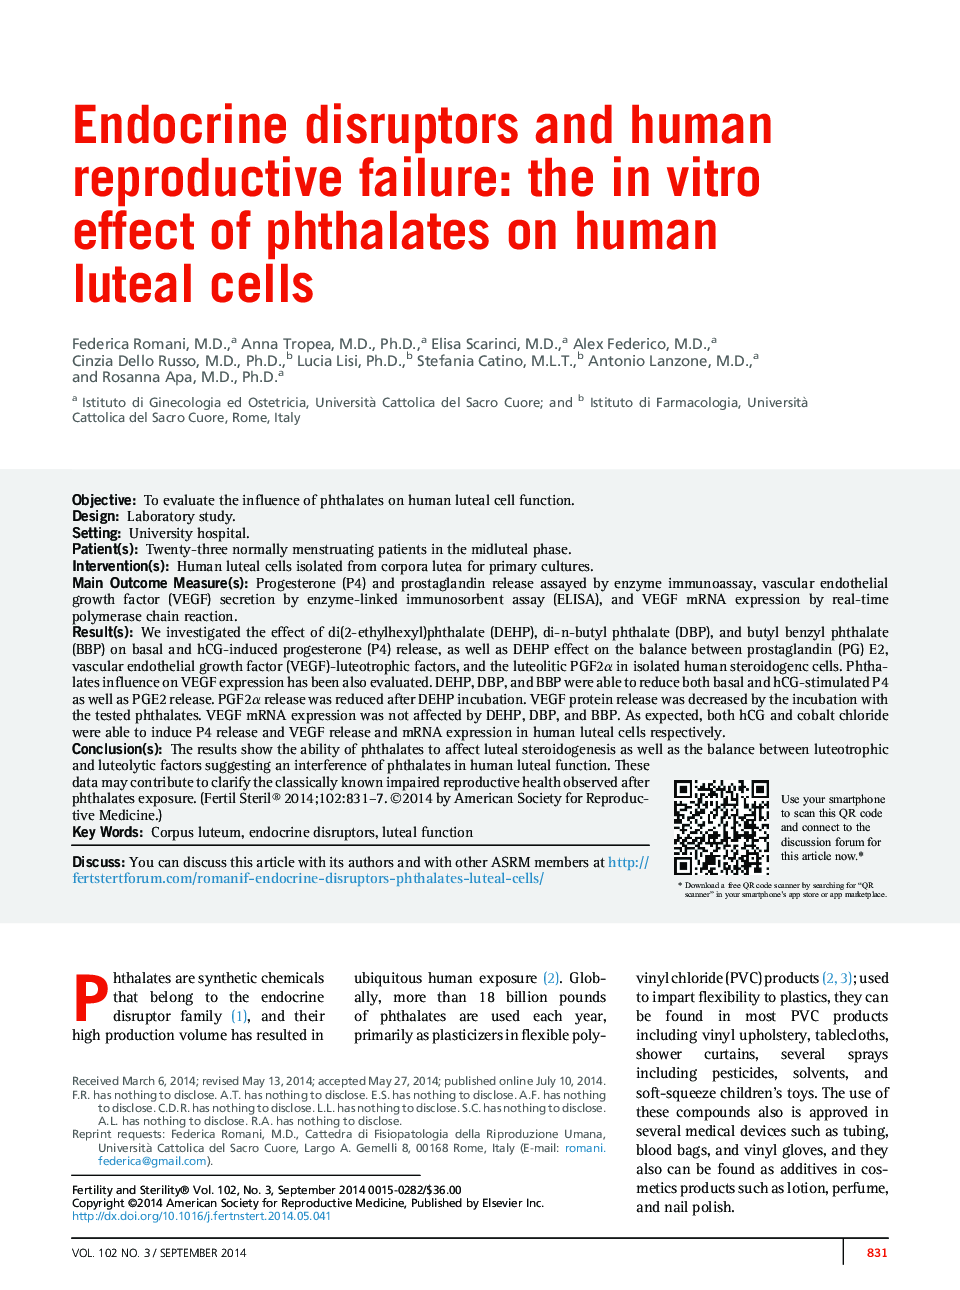 Endocrine disruptors and human reproductive failure: the inÂ vitro effect of phthalates on human luteal cells